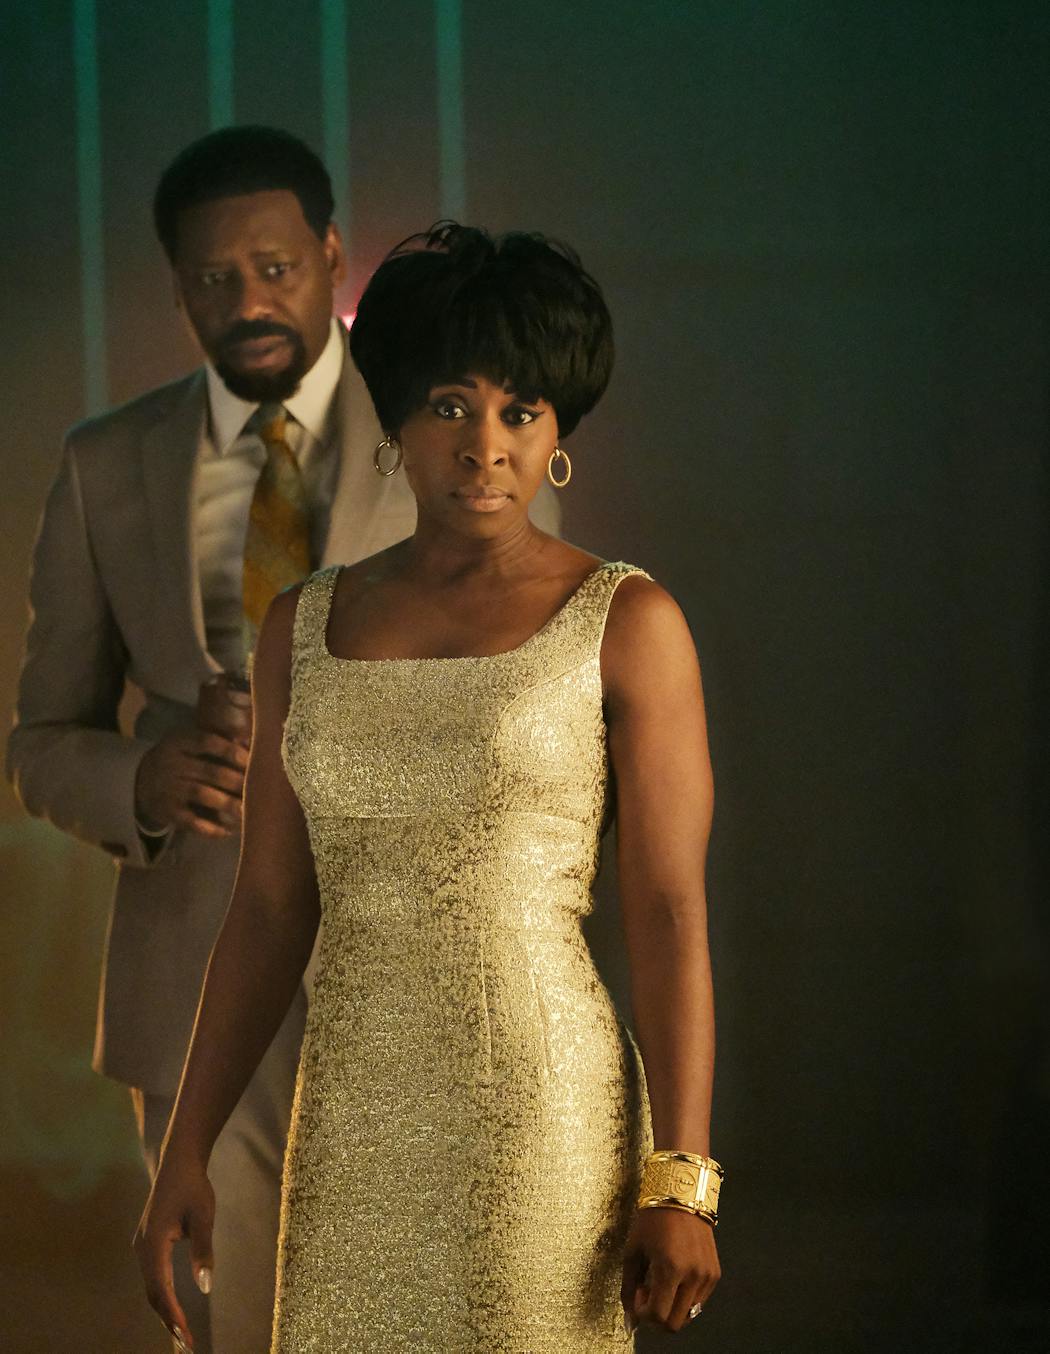 Oscar nominee Cynthia Erivo plays Aretha Franklin with Malcolm Barrett as her husband/manager Ted White.